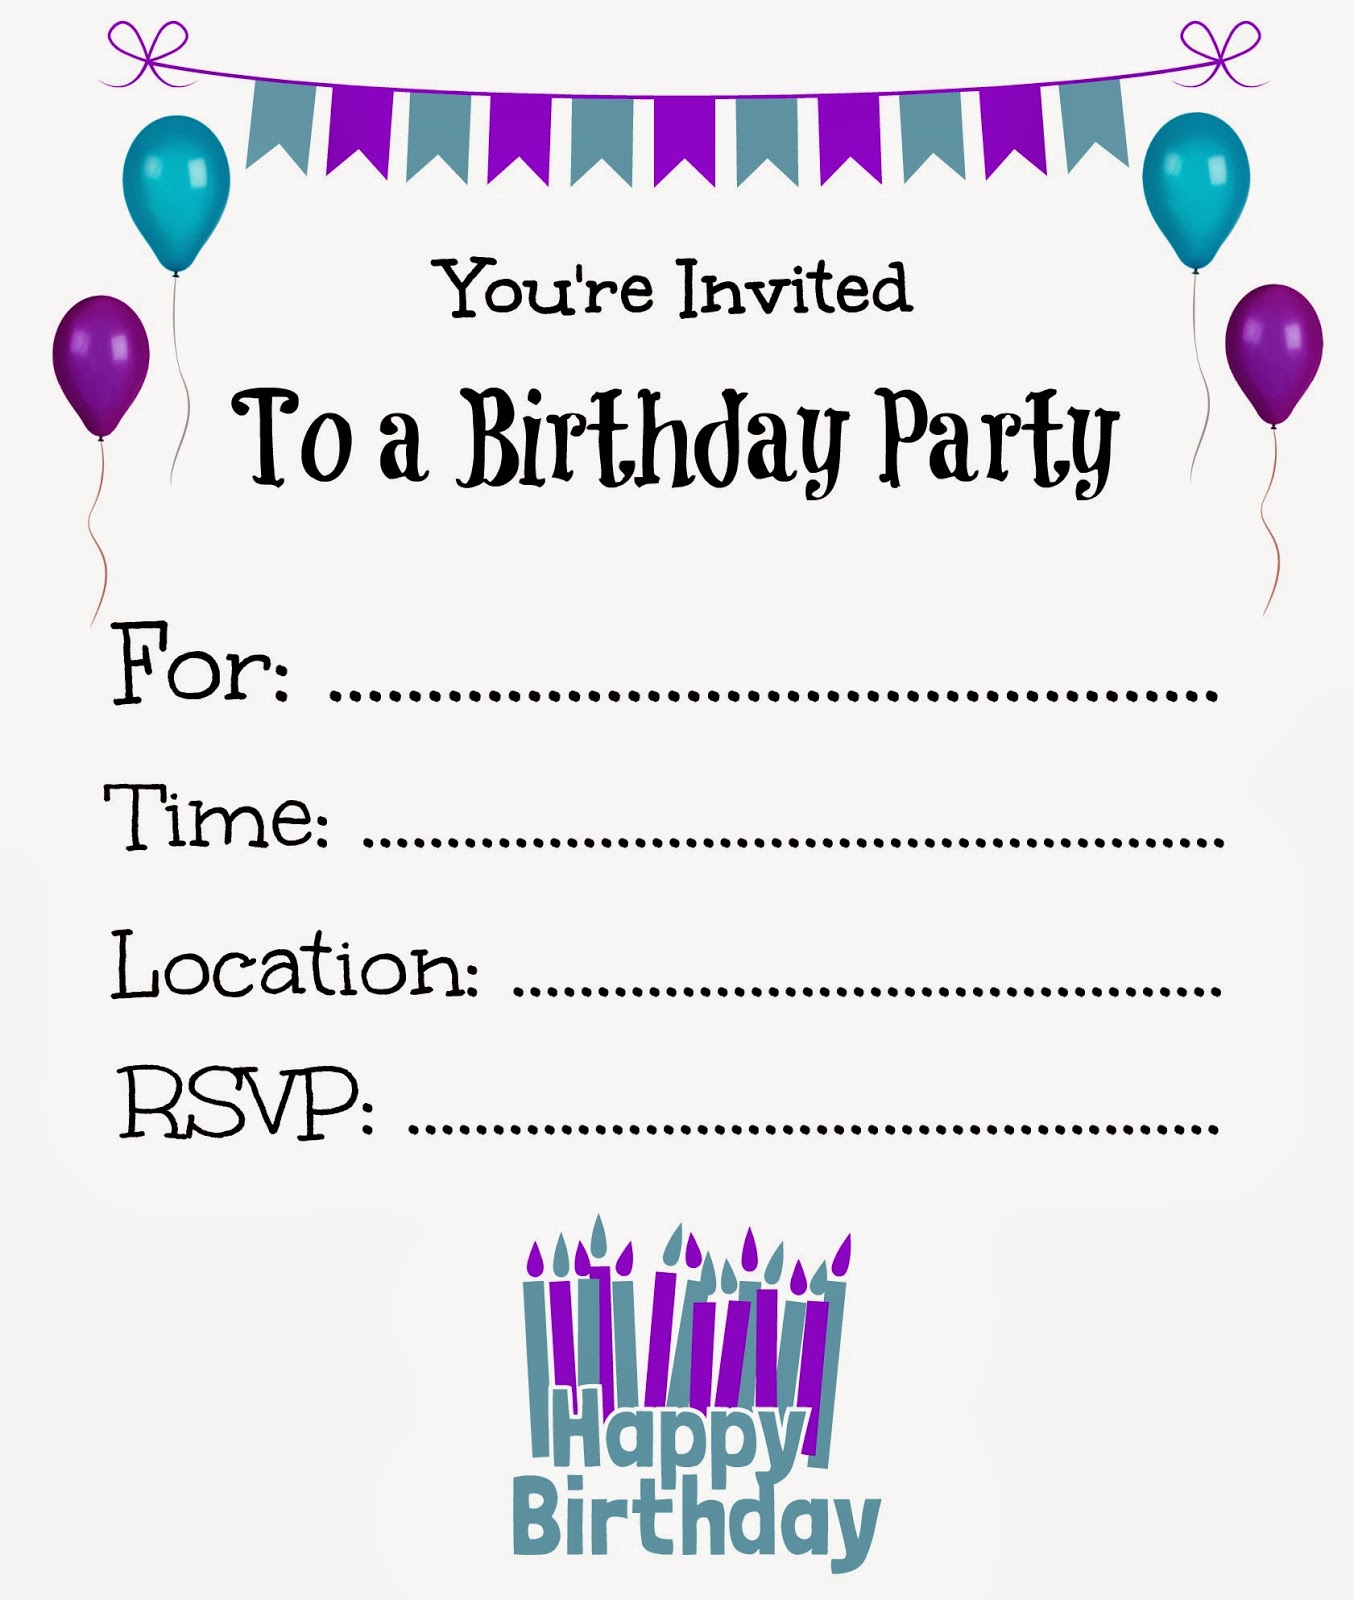 It's a Princess Thing: Free Printable Birthday Invitations For Kids